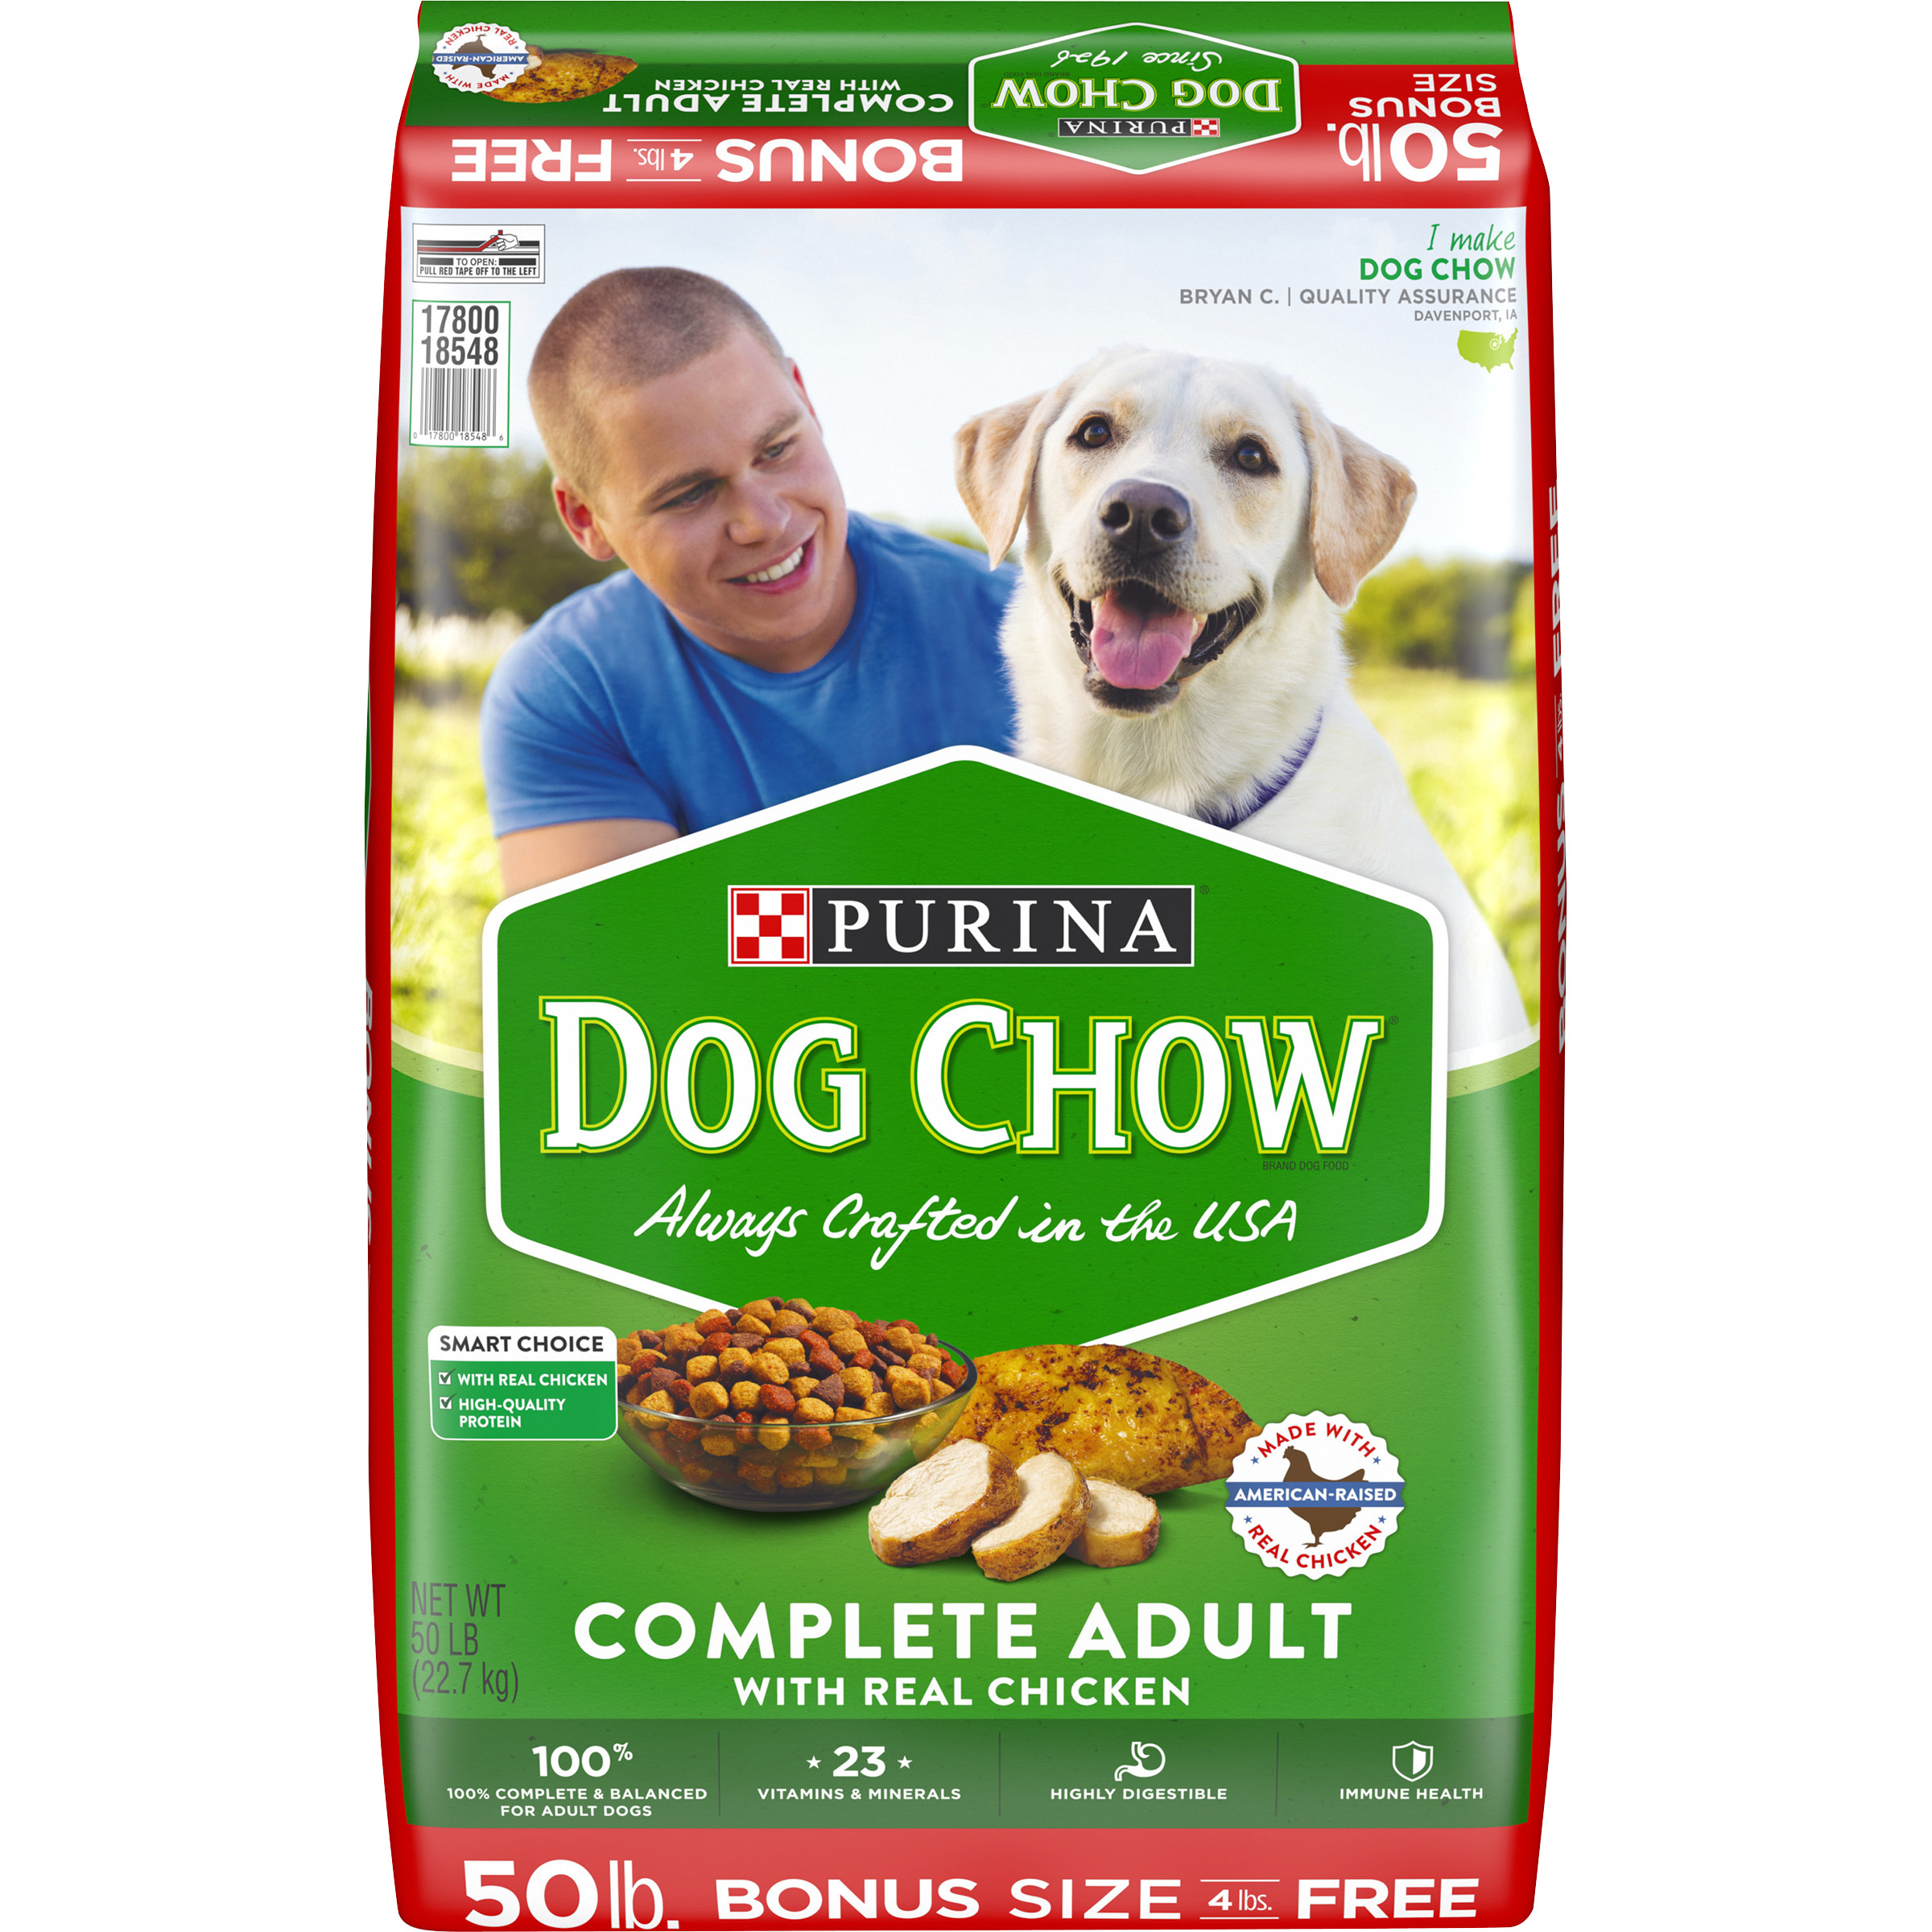 Purina Dog Chow Complete with Chicken Adult Dry Dog Food, Chicken Recipe - 50 lb. Bag - image 1 of 12